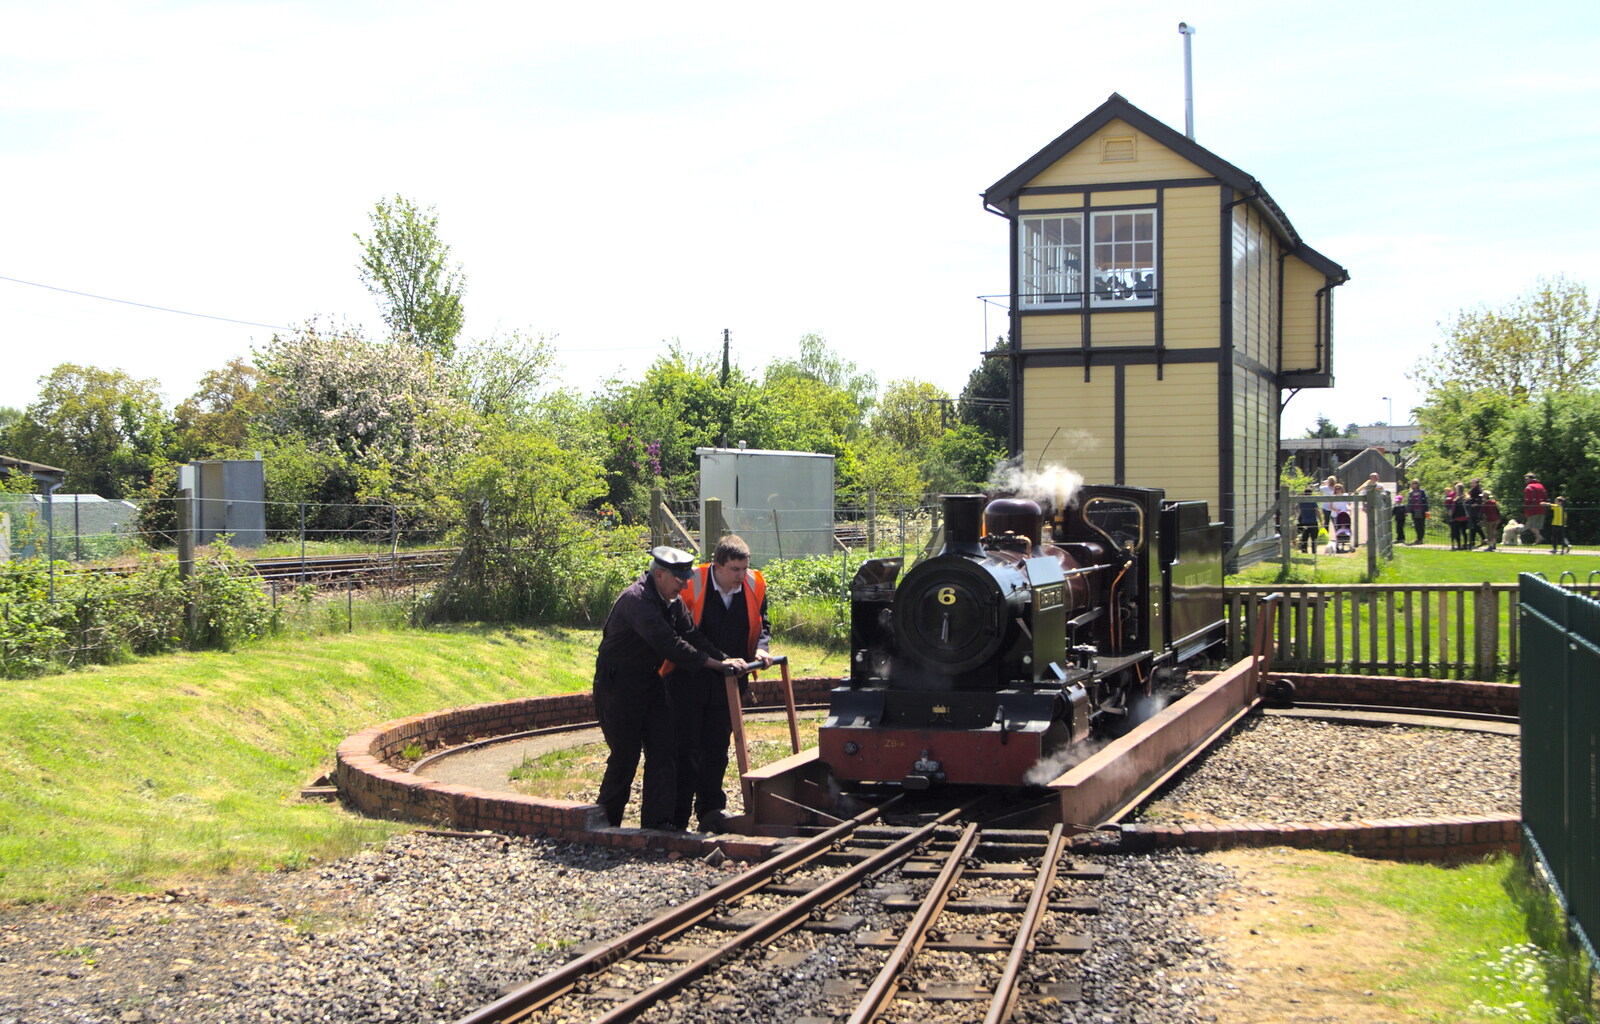 The engine spins on a turntable from The Bure Valley Railway, Aylsham, Norfolk - 26th May 2013